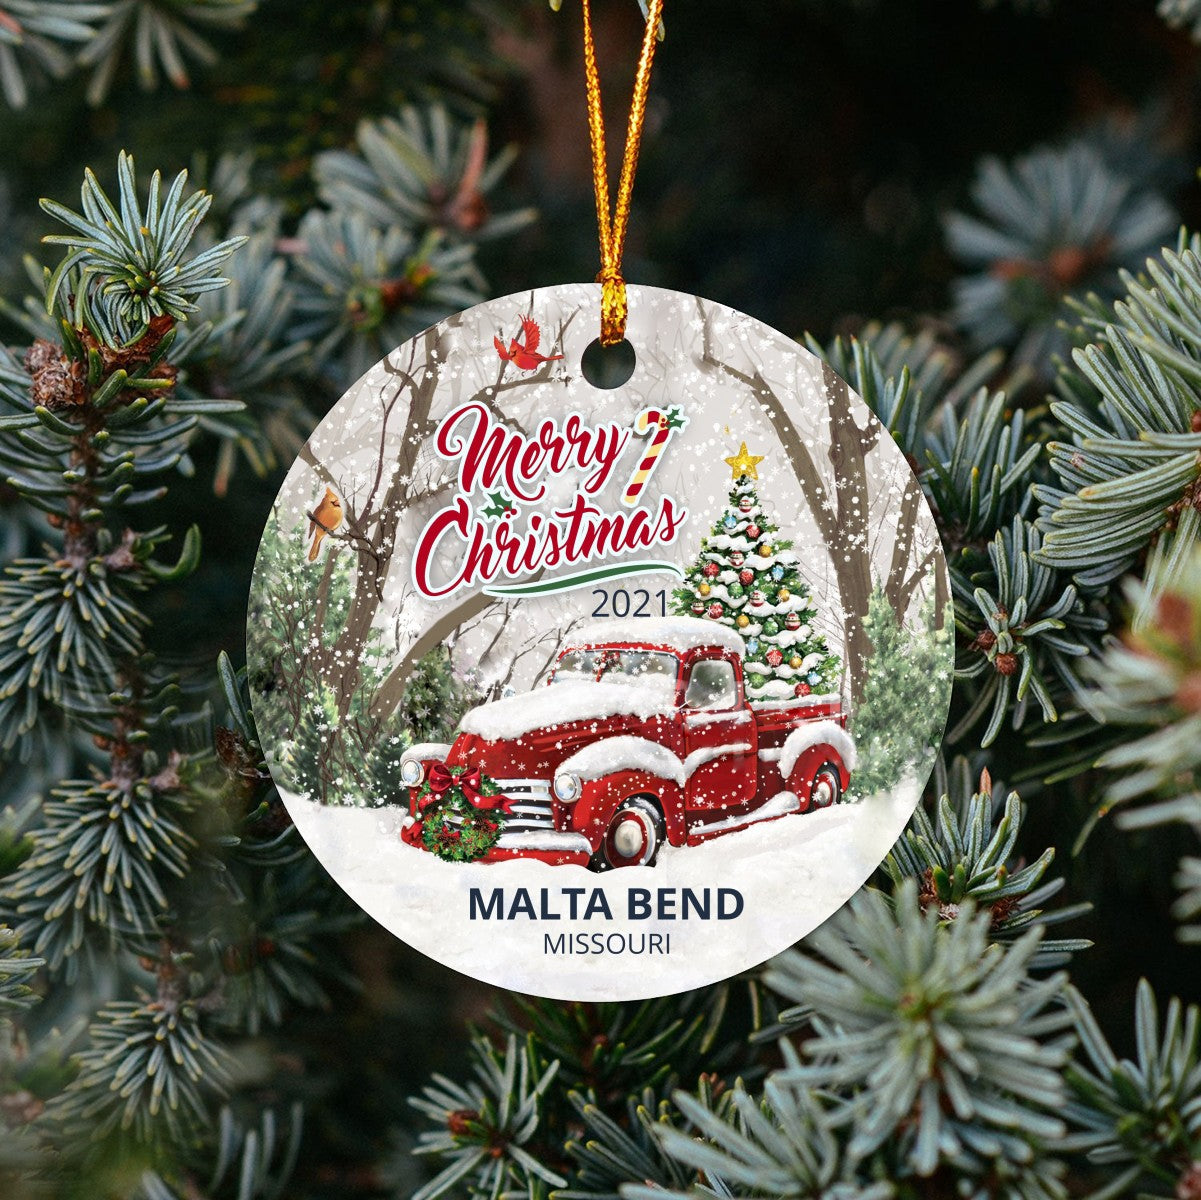 Christmas Tree Ornaments Malta Bend - Ornament With Name City, State Malta Bend Missouri MO Ornament - Red Truck Xmas Ornaments 3'' Plastic Gift For Family, Friend And Housewarming